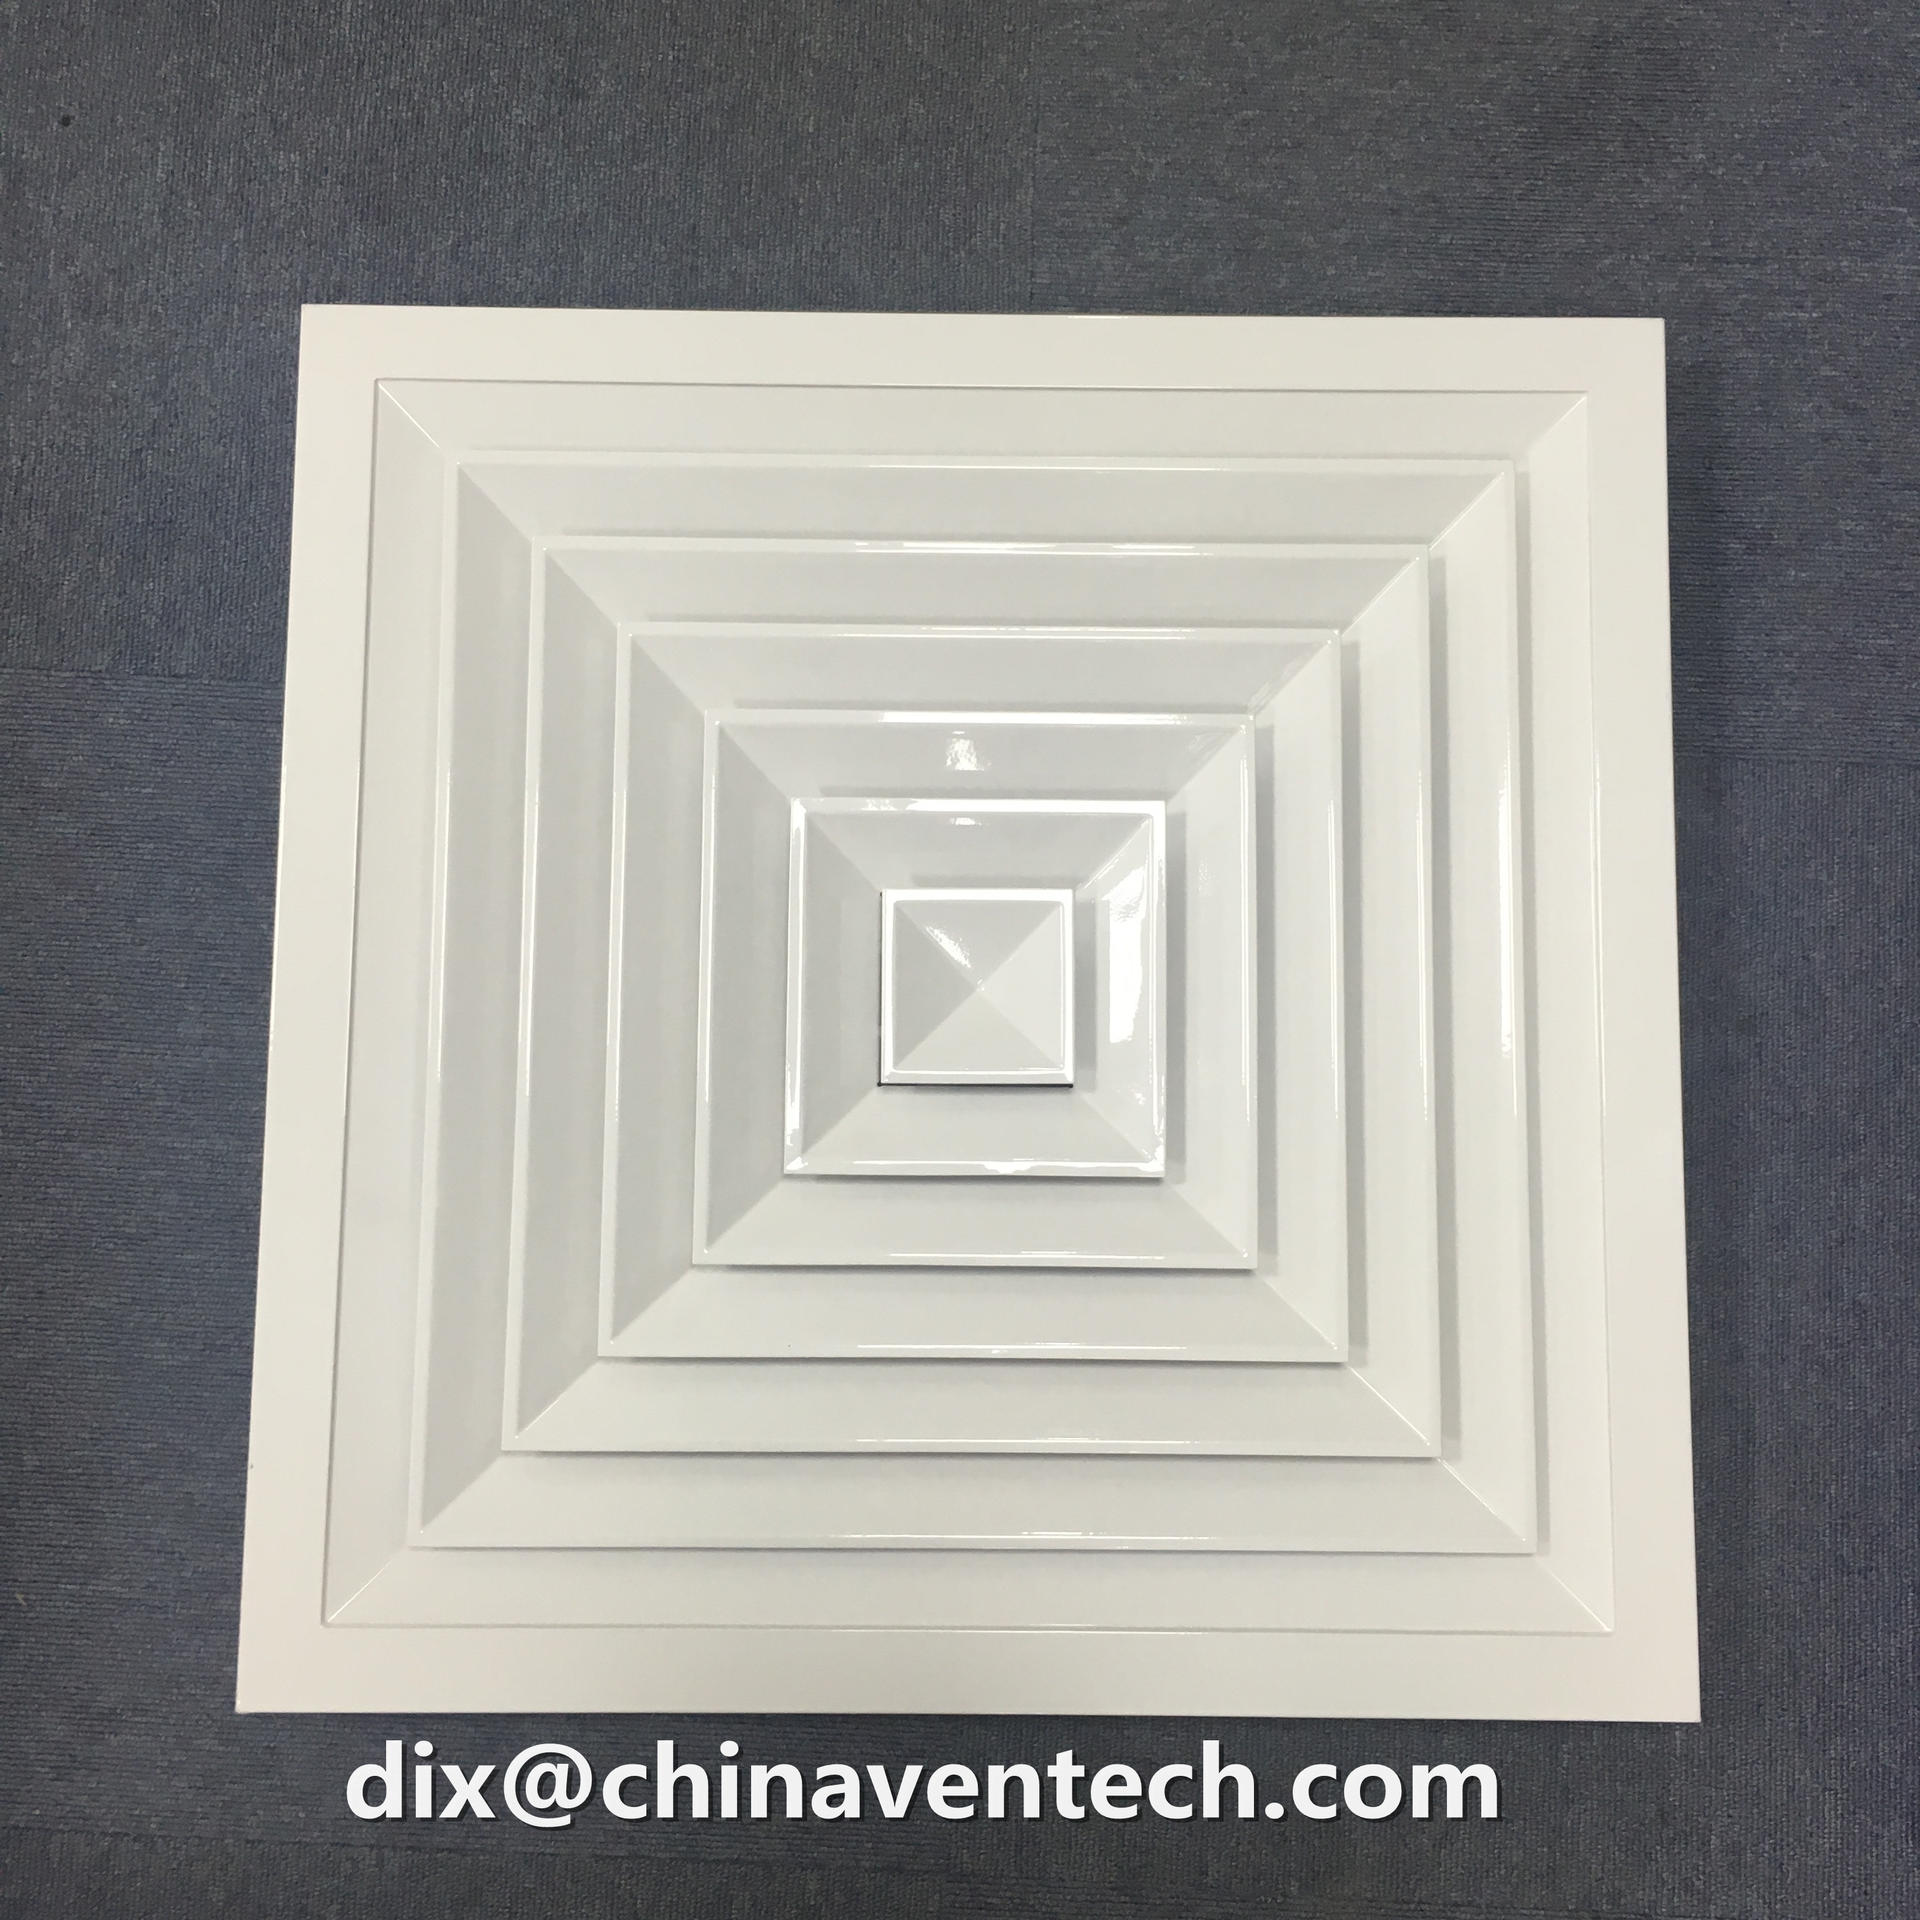 Hvac ceiling mounted ventilation 4 way square air diffuser